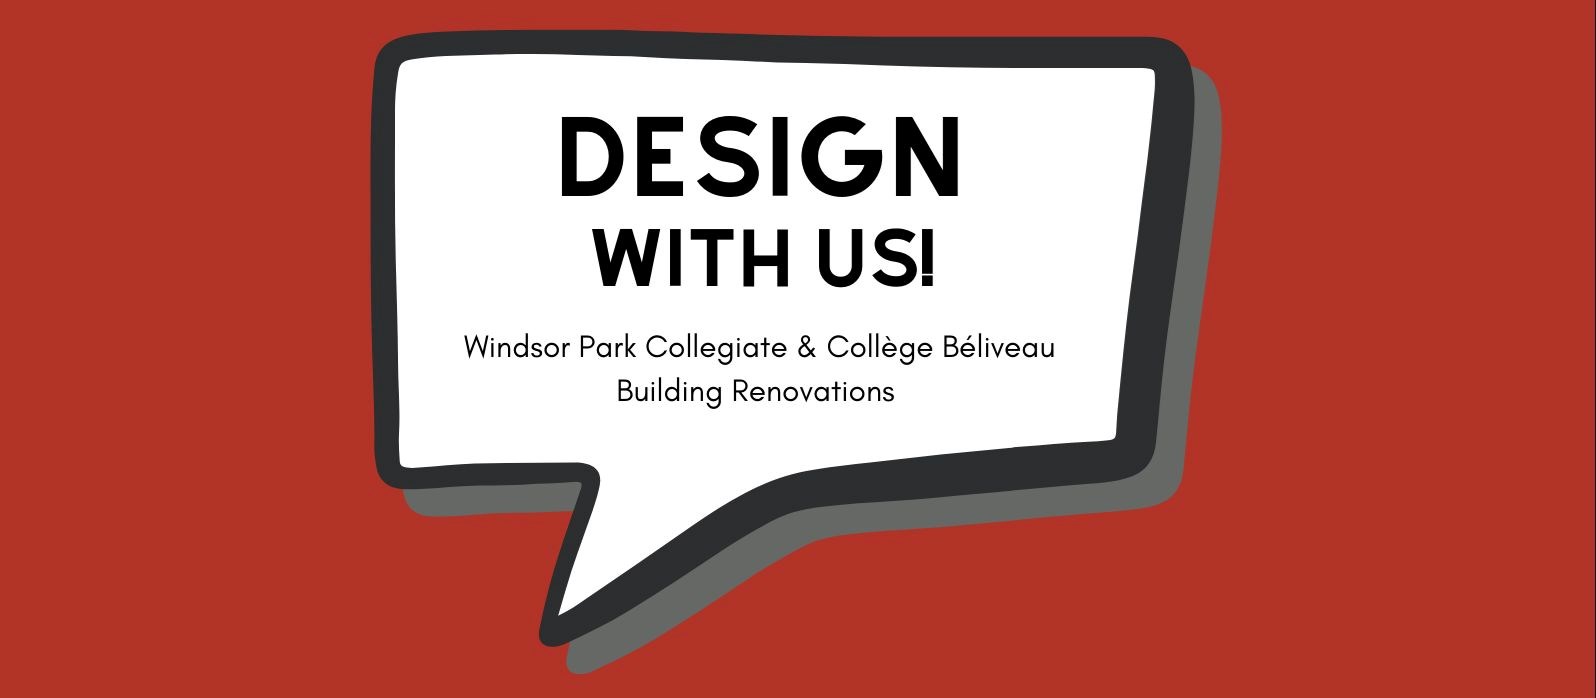 Design with Us! WPC & CB Building Renovations